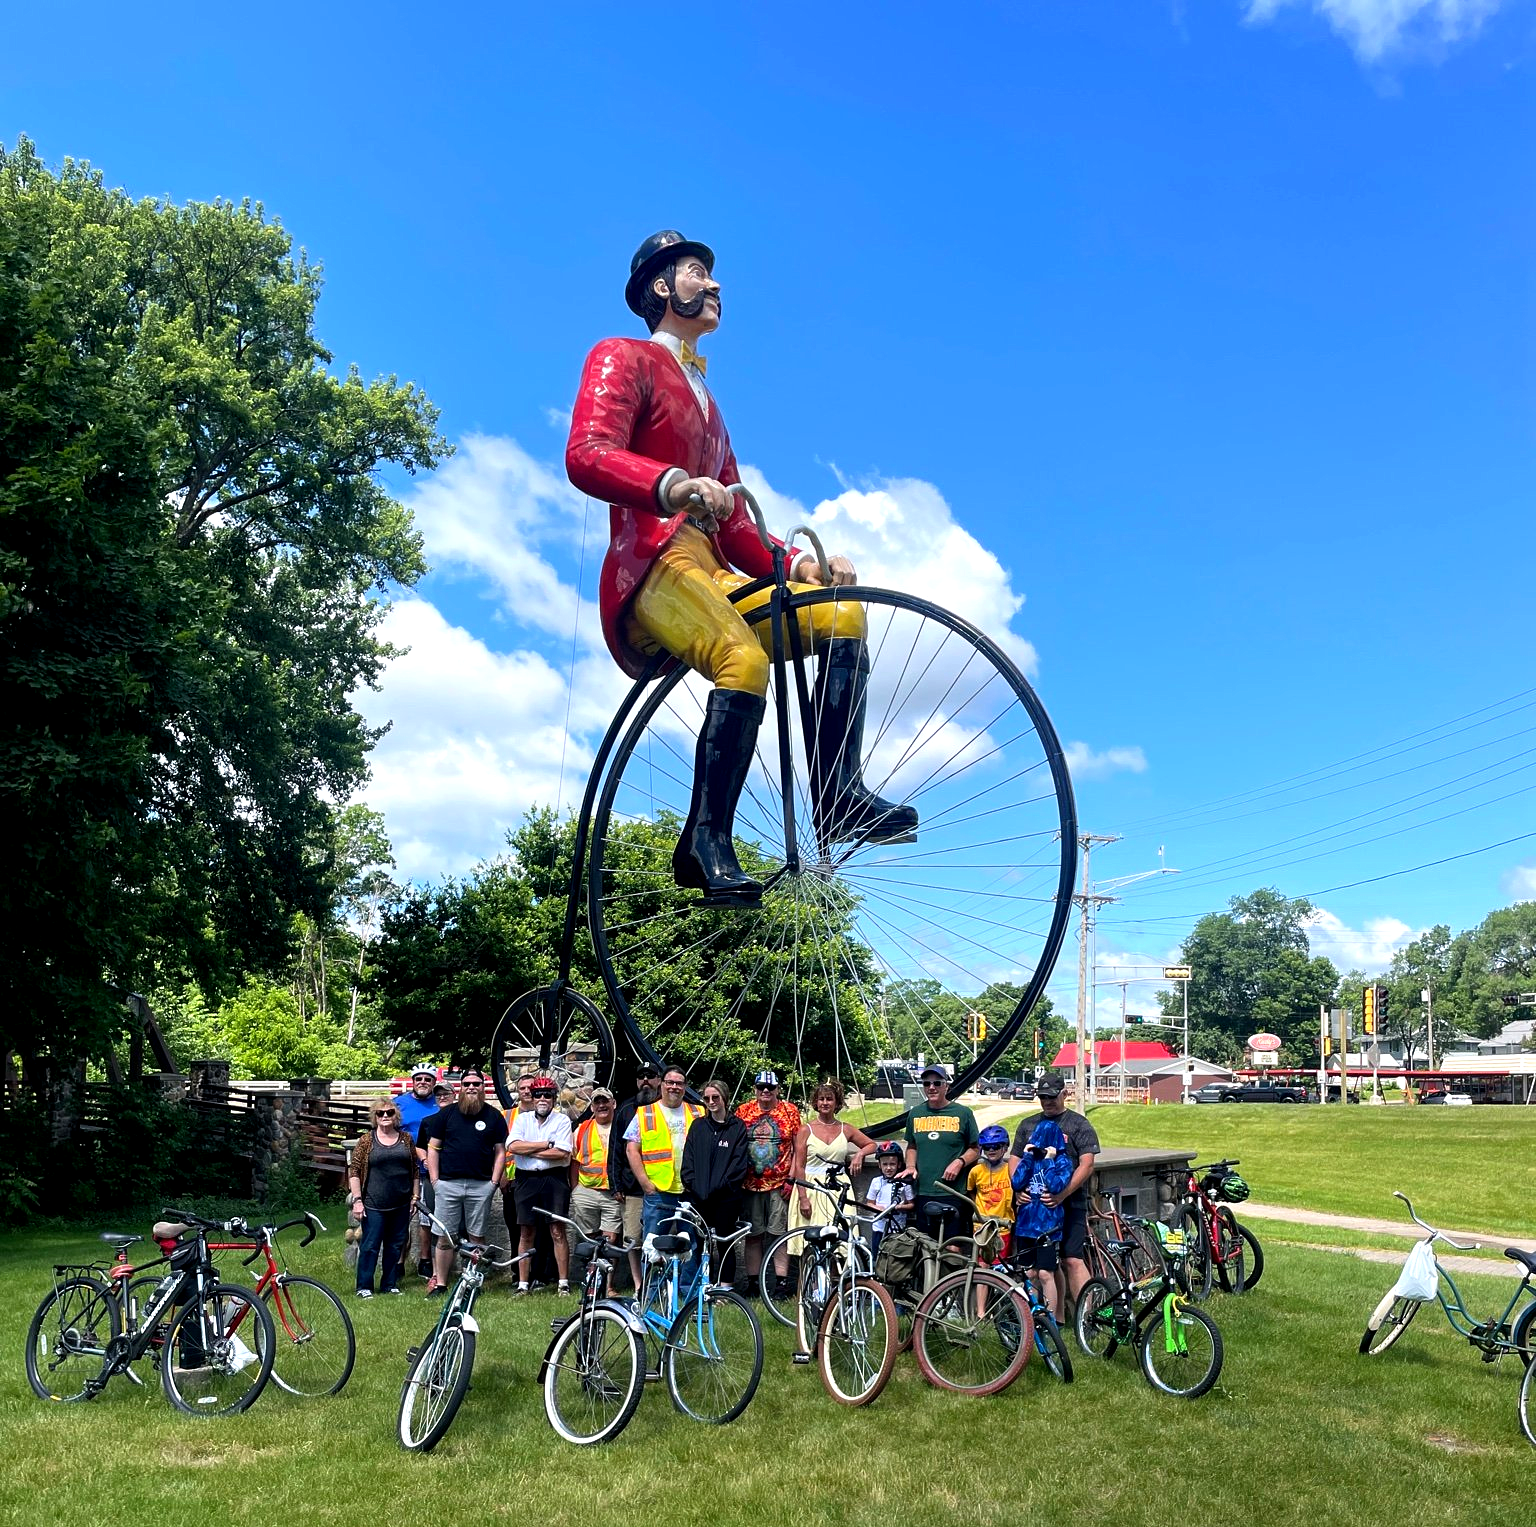 World's Largest Bicyclist Statue: world record set in Sparta, Wisconsin